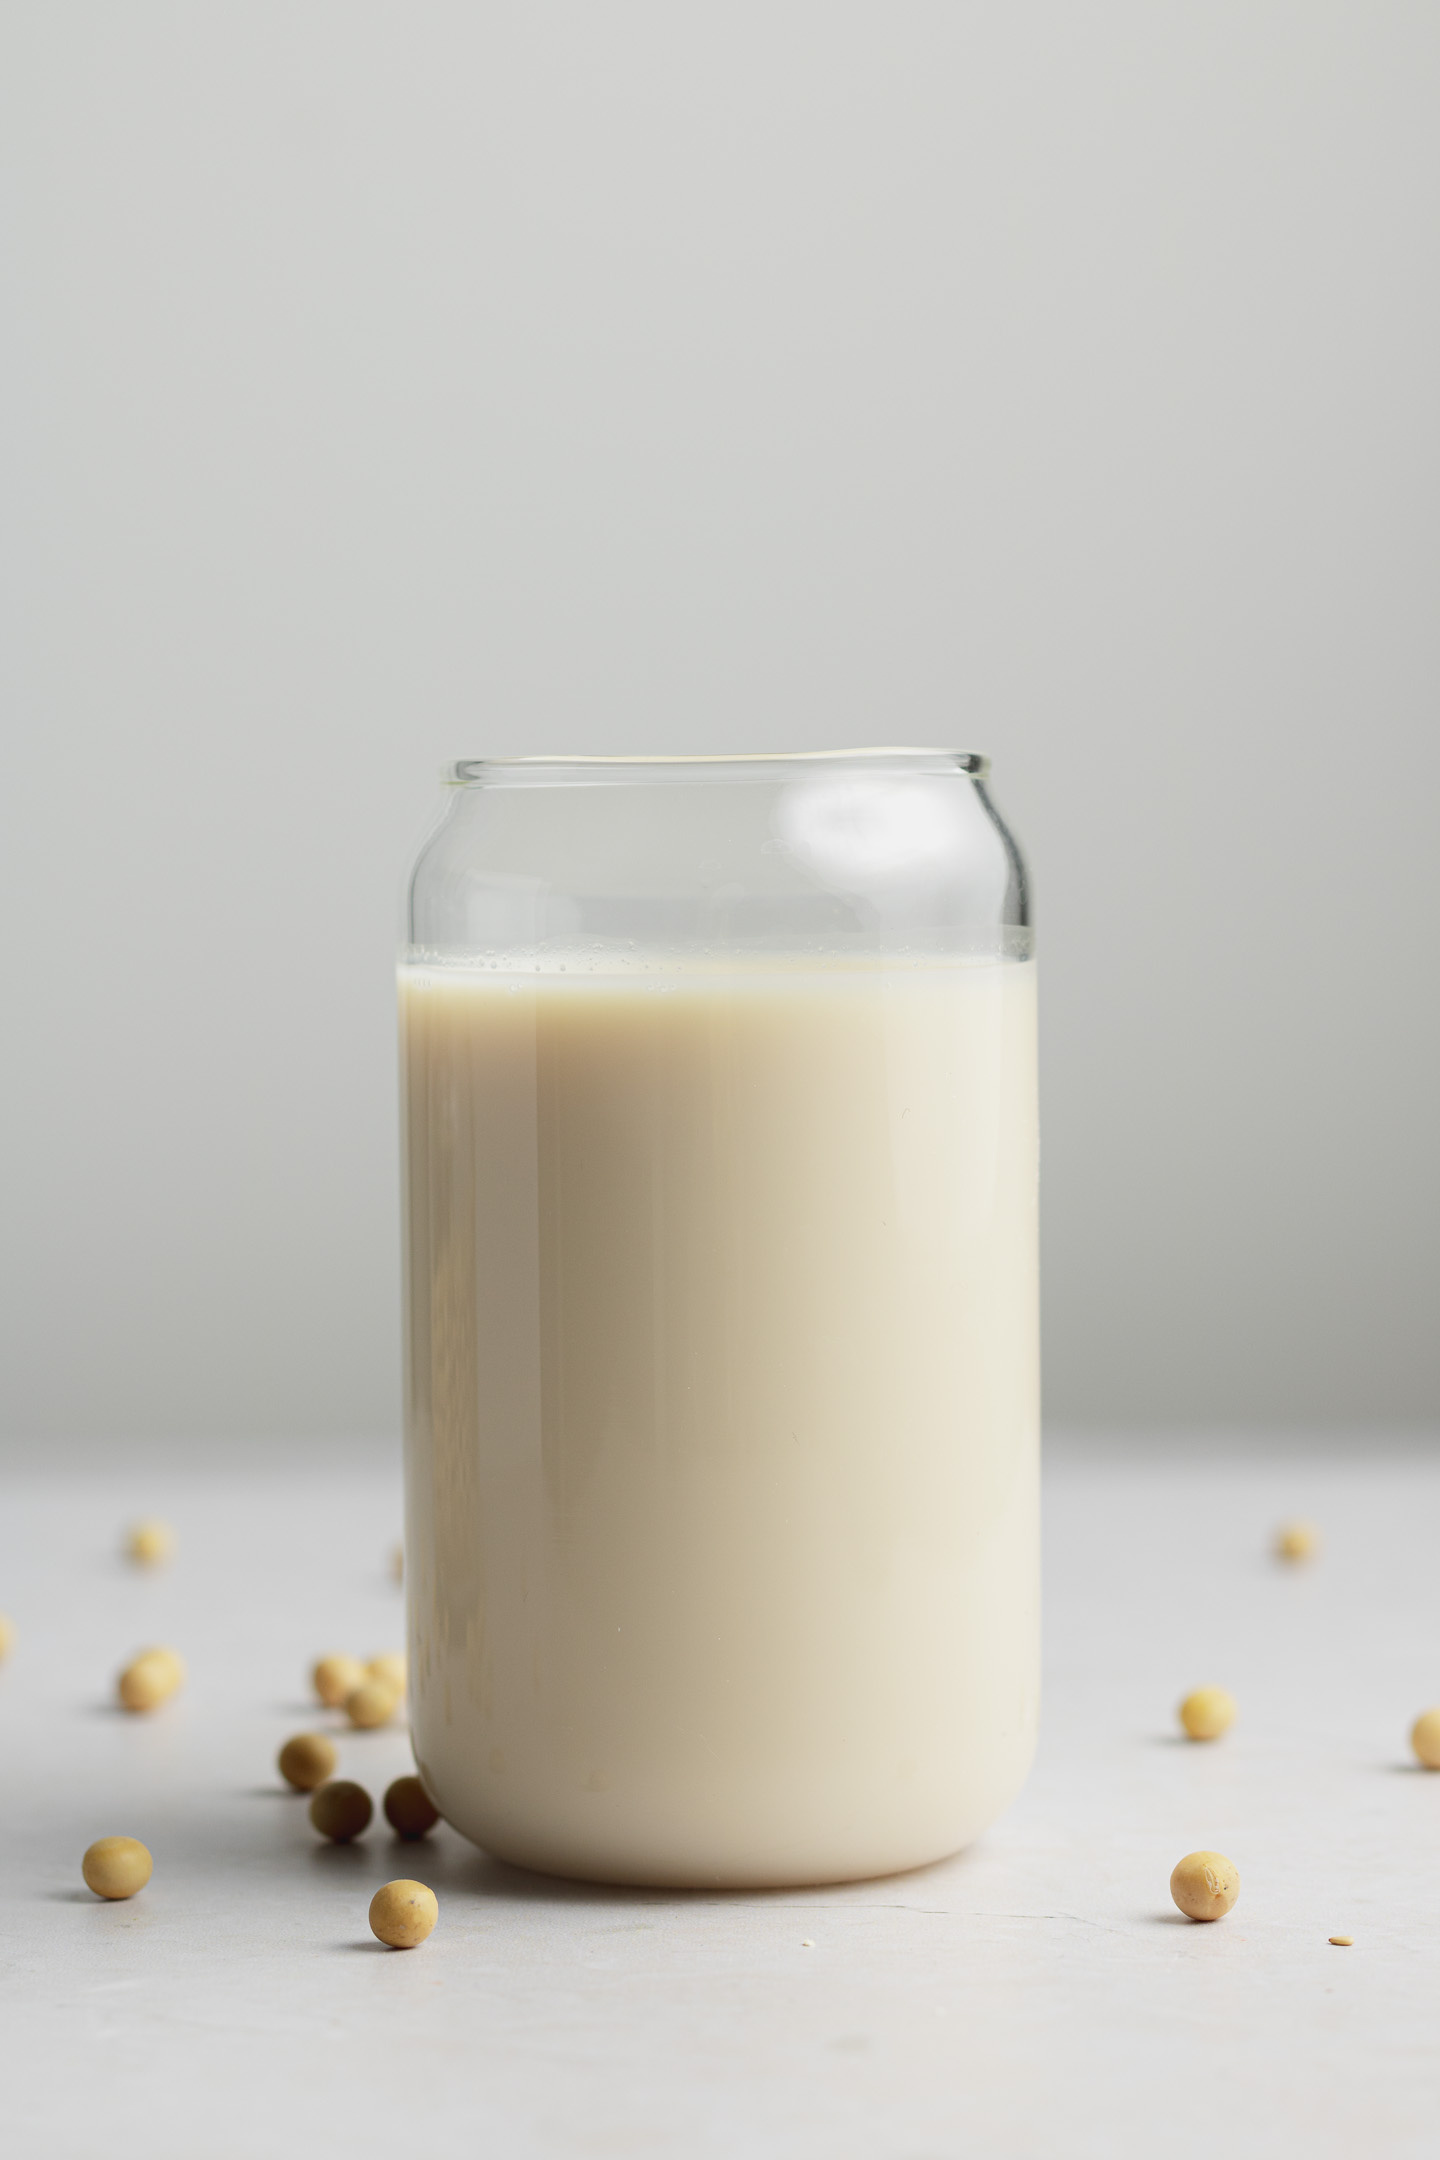 Milk: The composition varies across different mammal species. 1440x2160 HD Background.